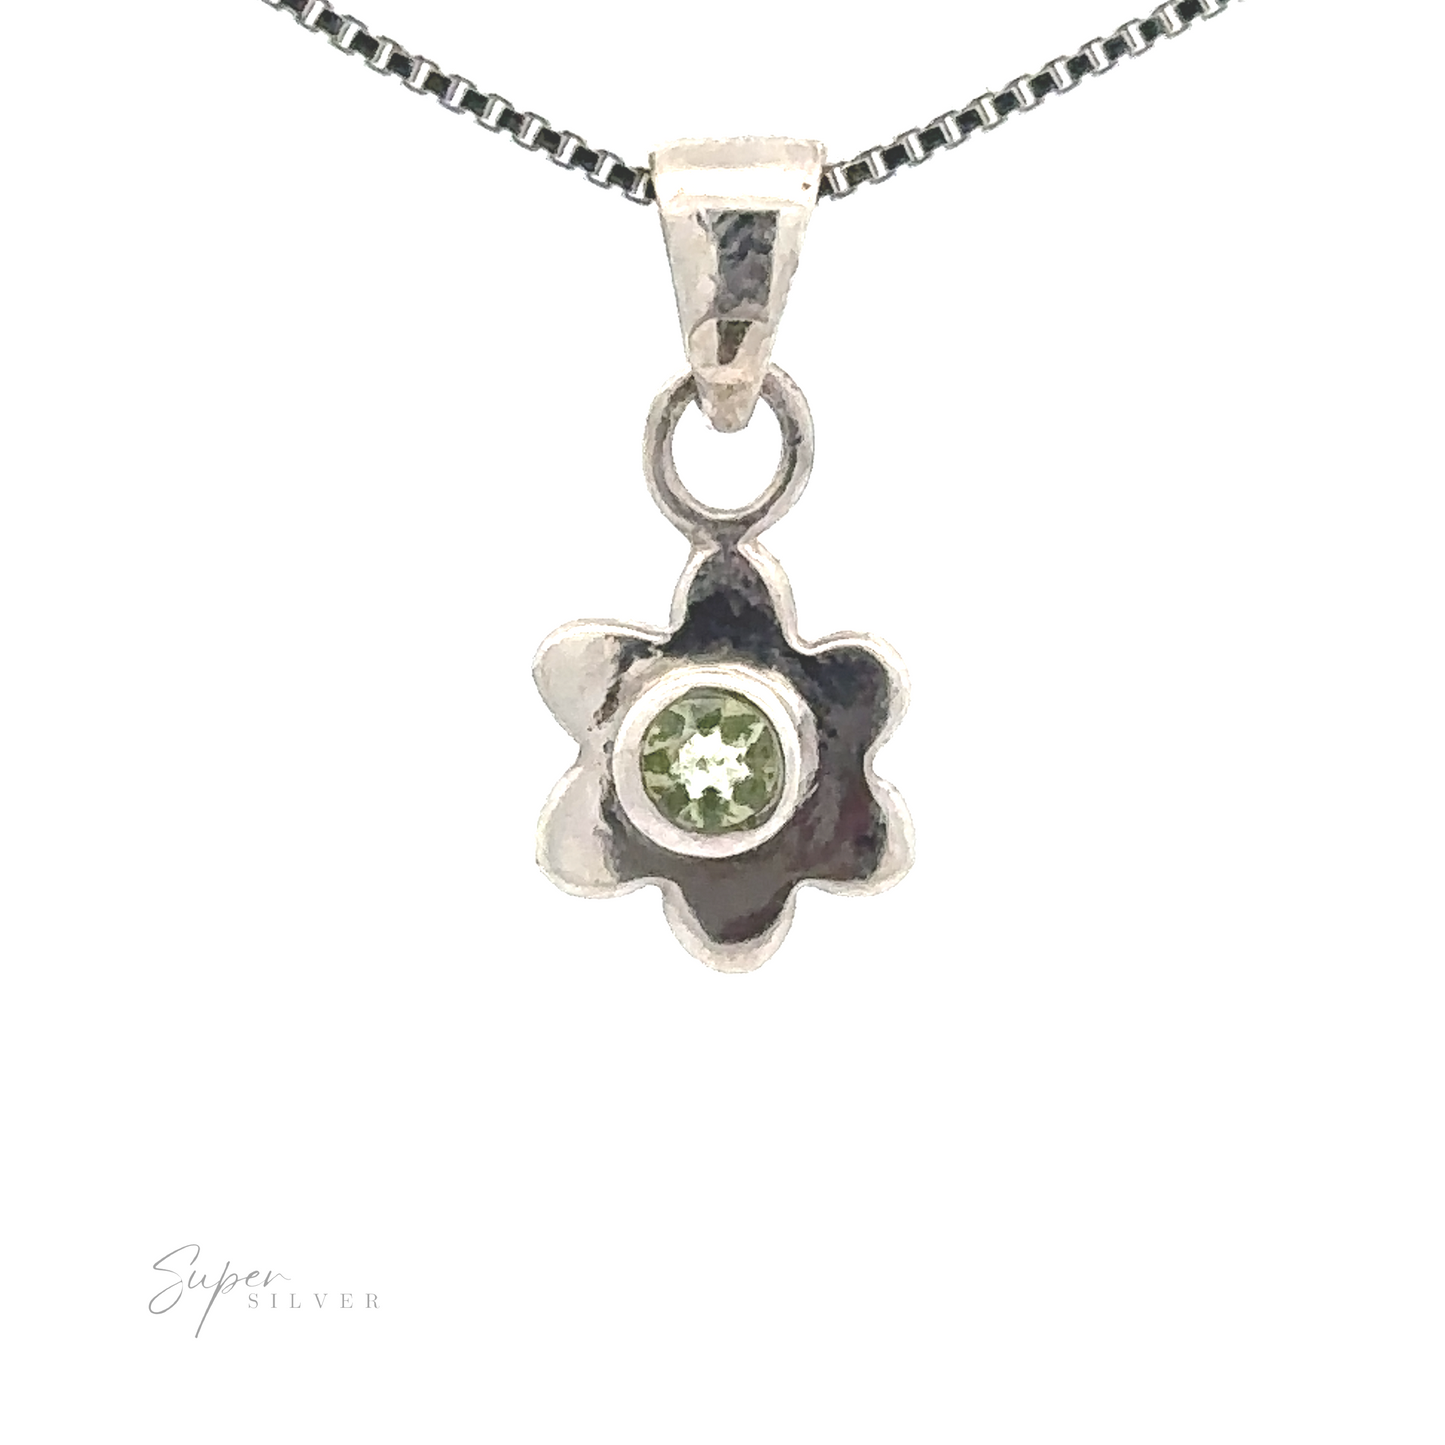 
                  
                    A Tiny Gemstone Flower Pendant with a green gemstone at its heart, showcasing a delicate flower design, hangs elegantly from a silver chain necklace.
                  
                